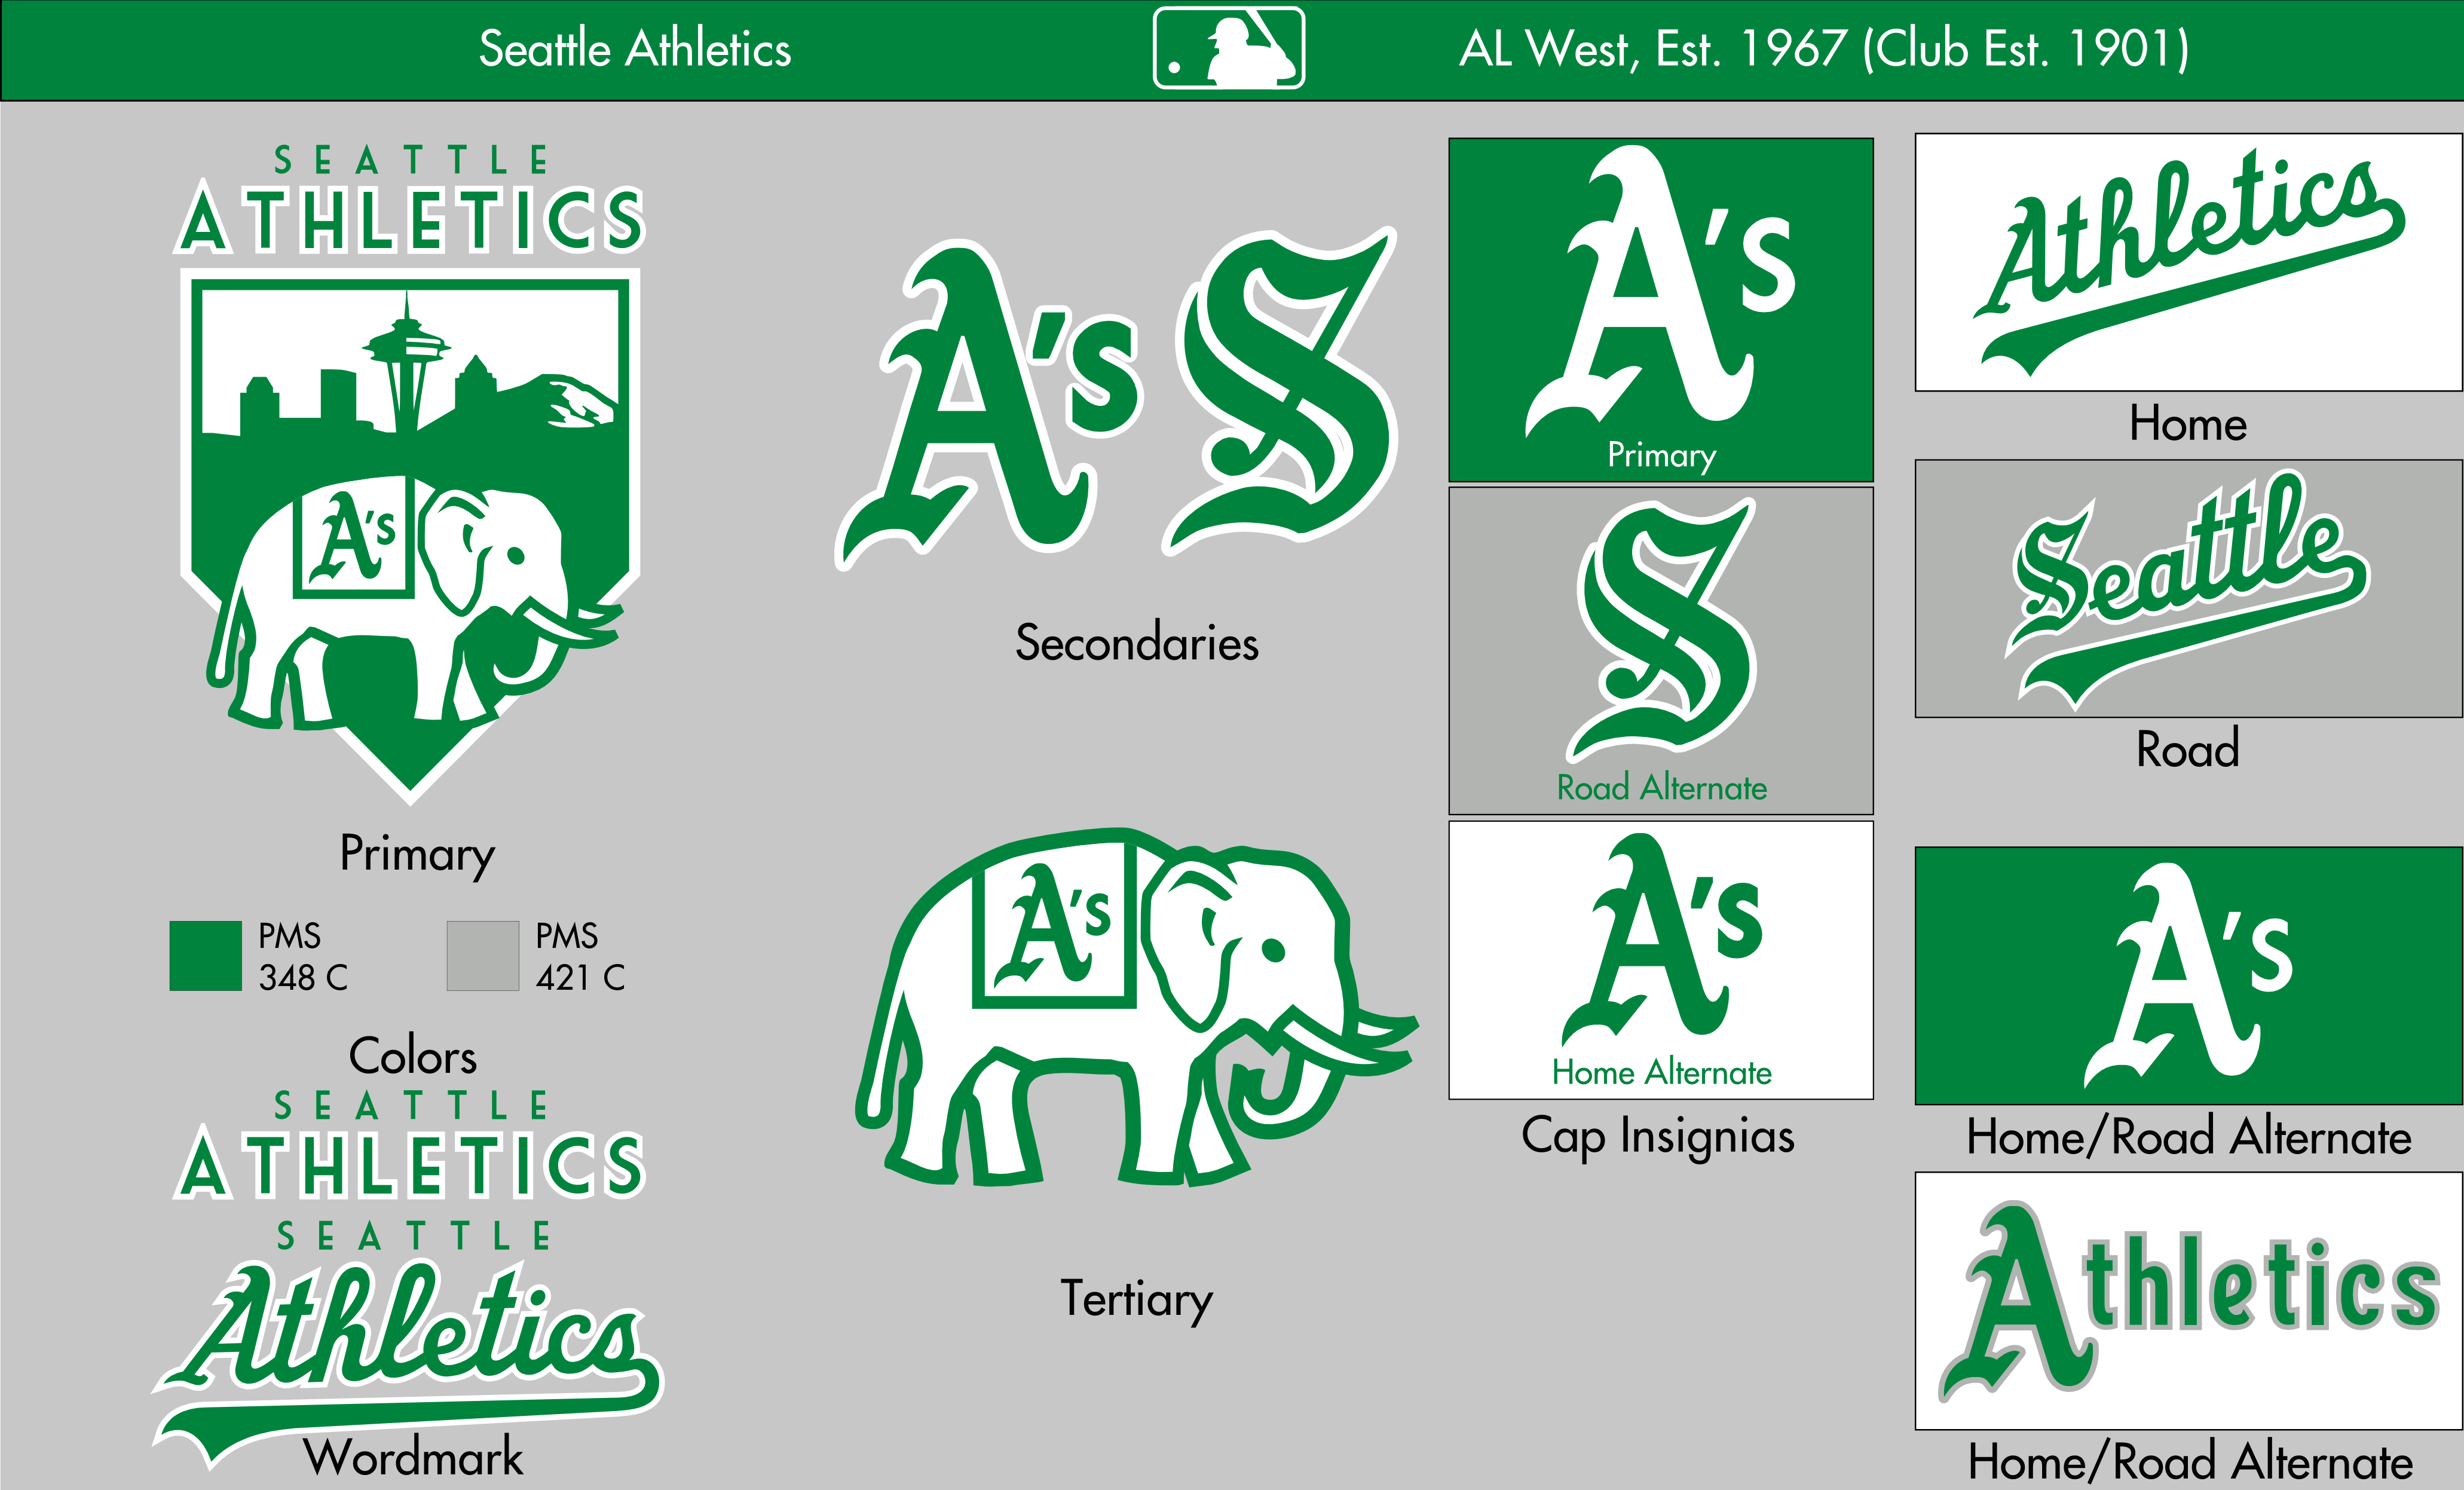 White and Green Block Logo - MLB: The Defunct Saga White Sox and Brewers Prototypes